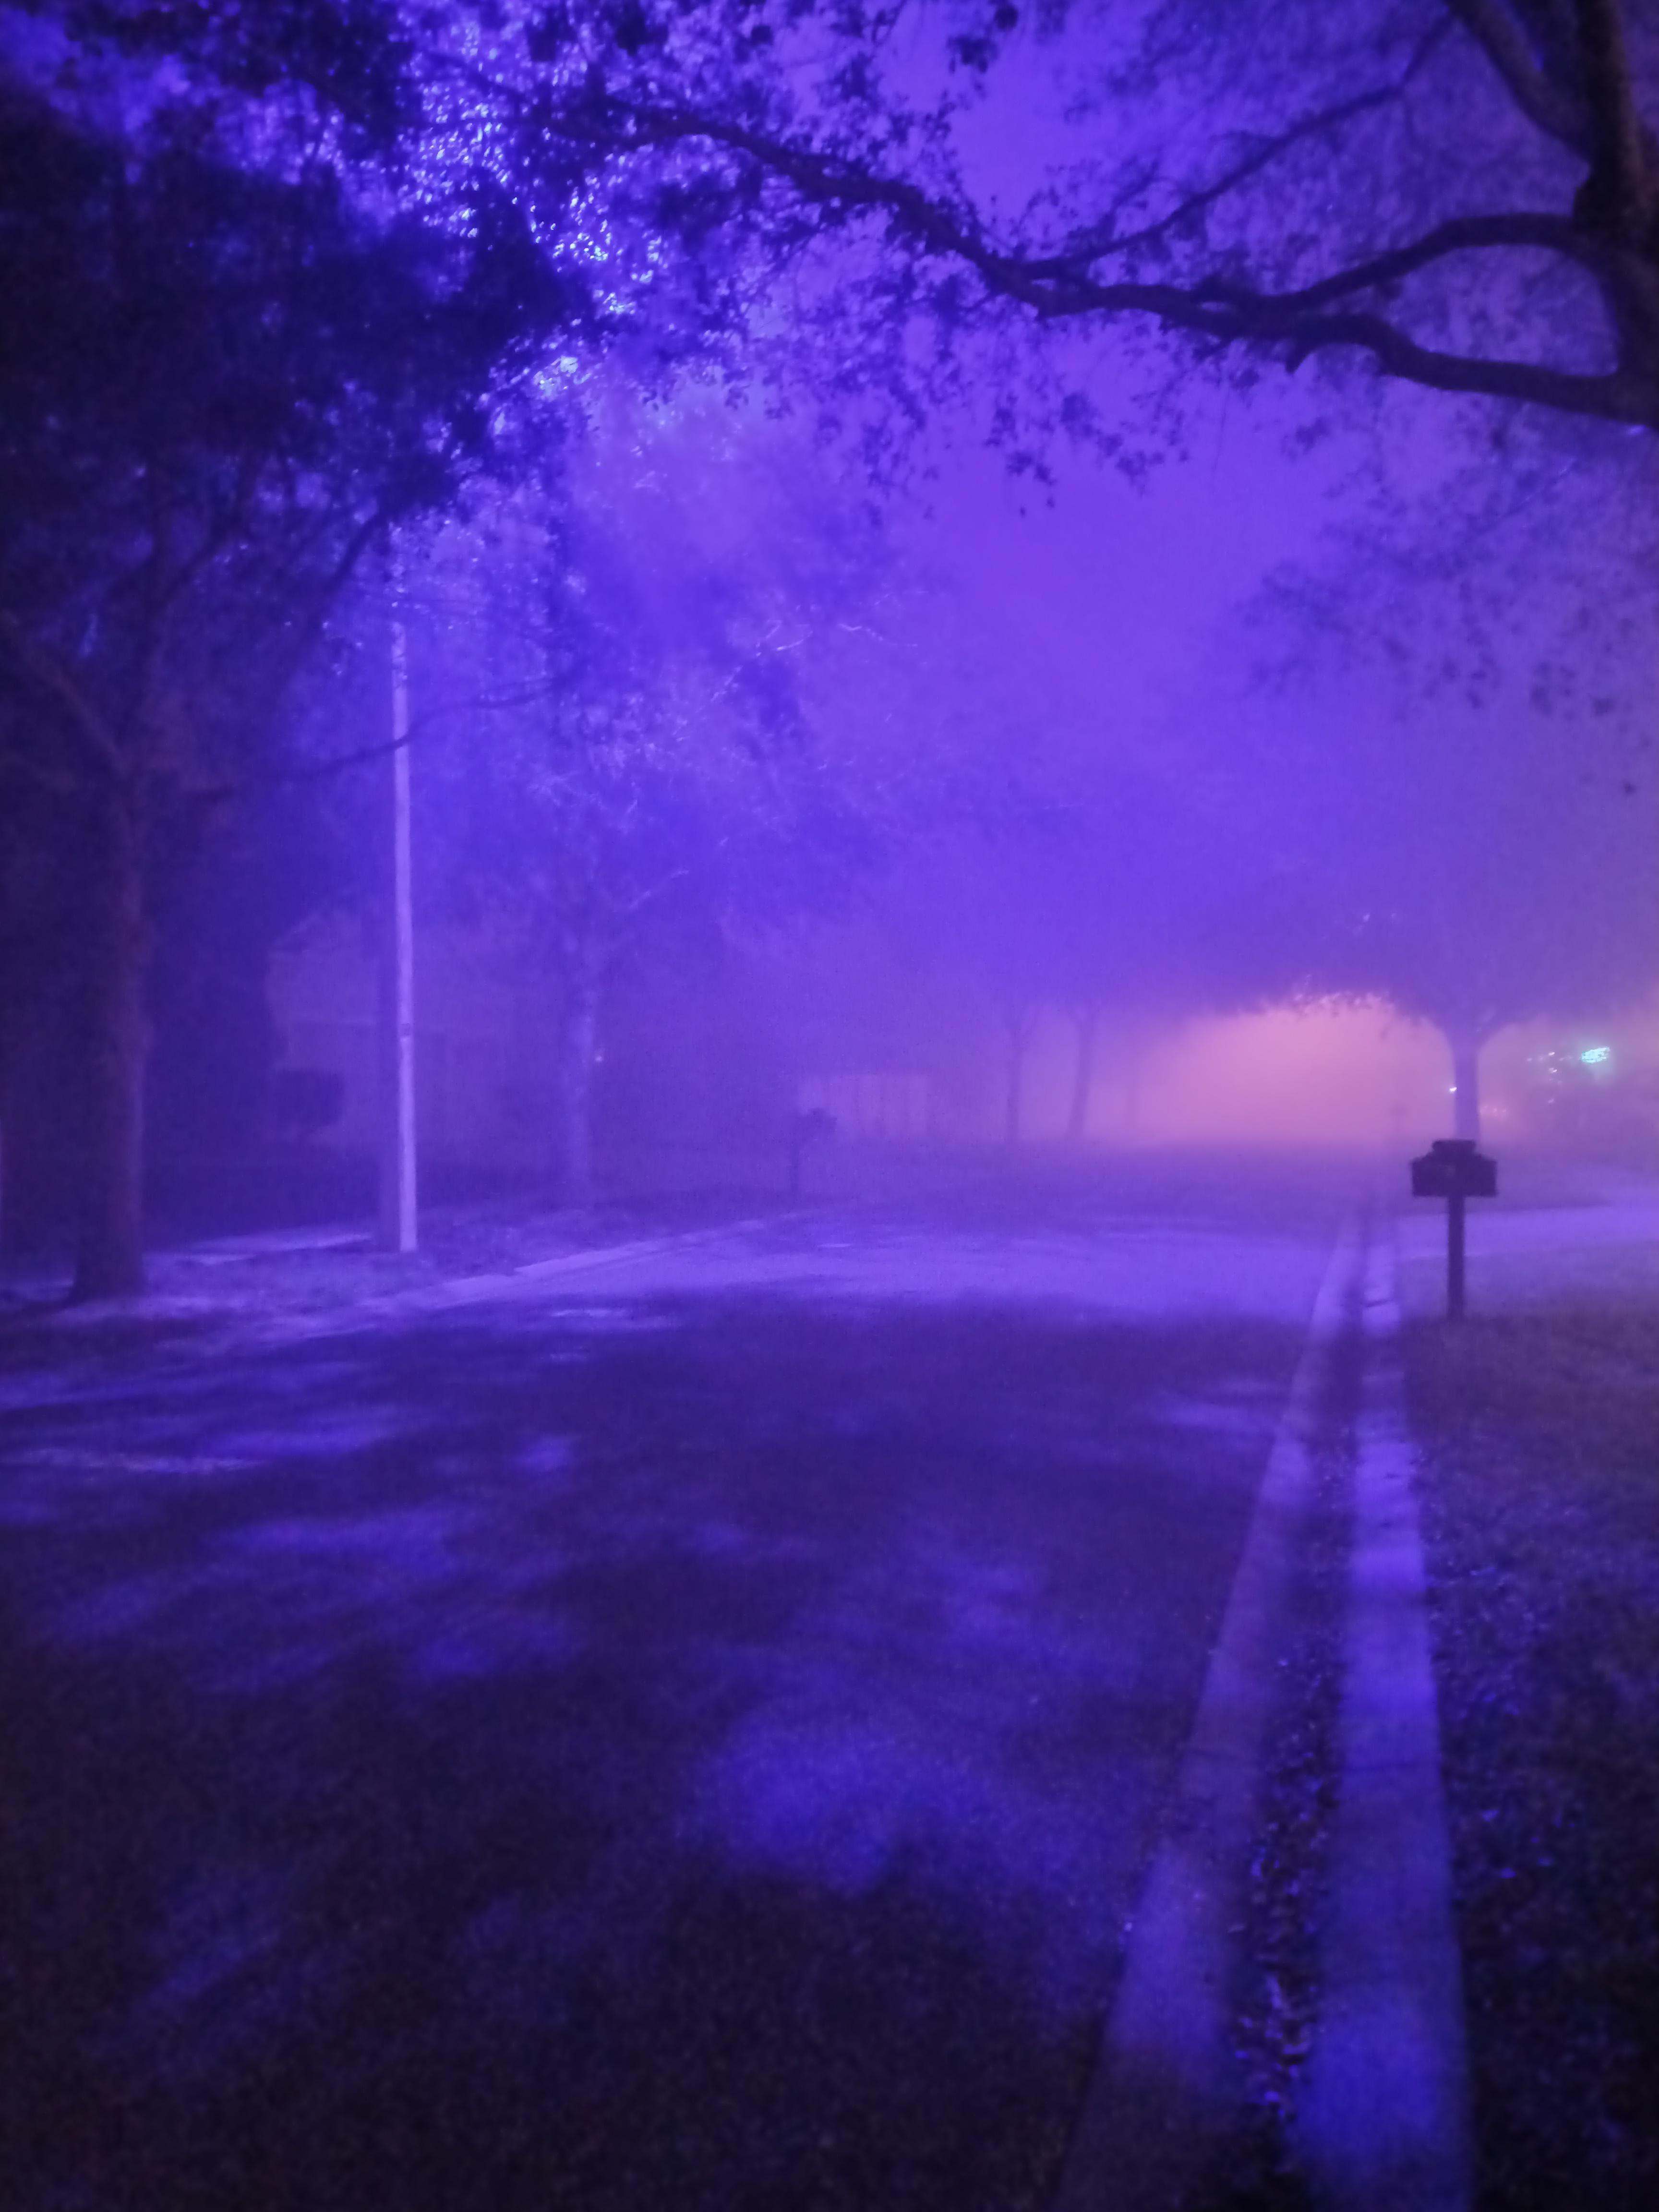 Tampa FL purple street lights and mixture of fog on New Years eve. What horror villain will come out from the fog?